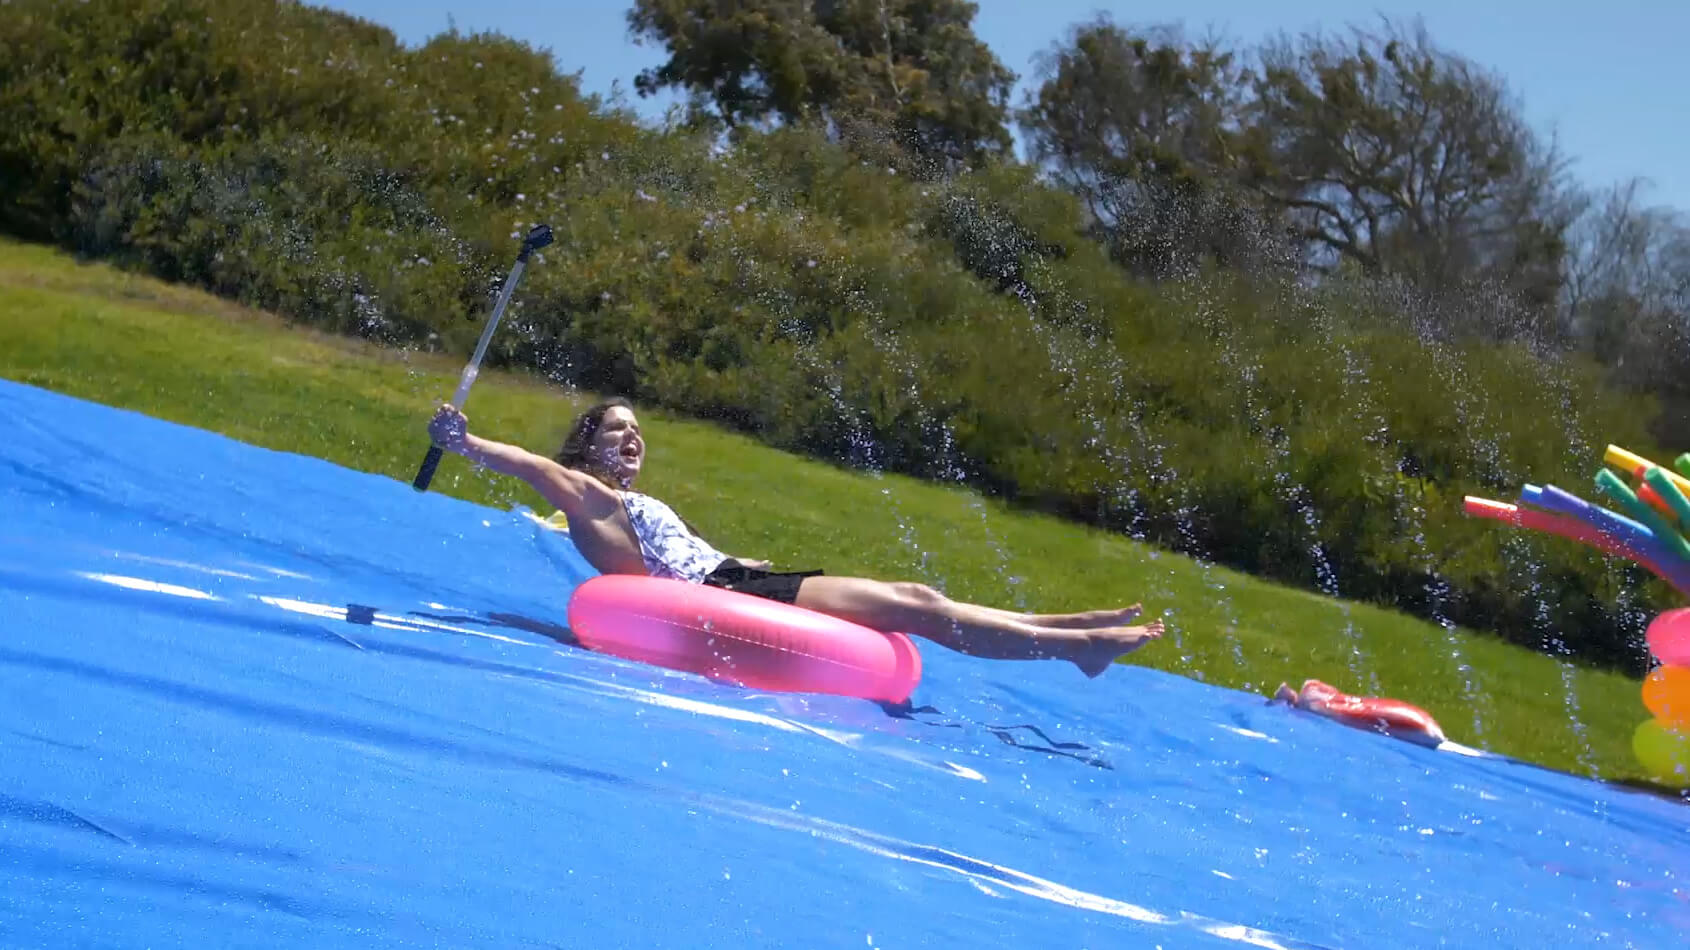 A female rides an inner tube down a water slide for Hollister Co.